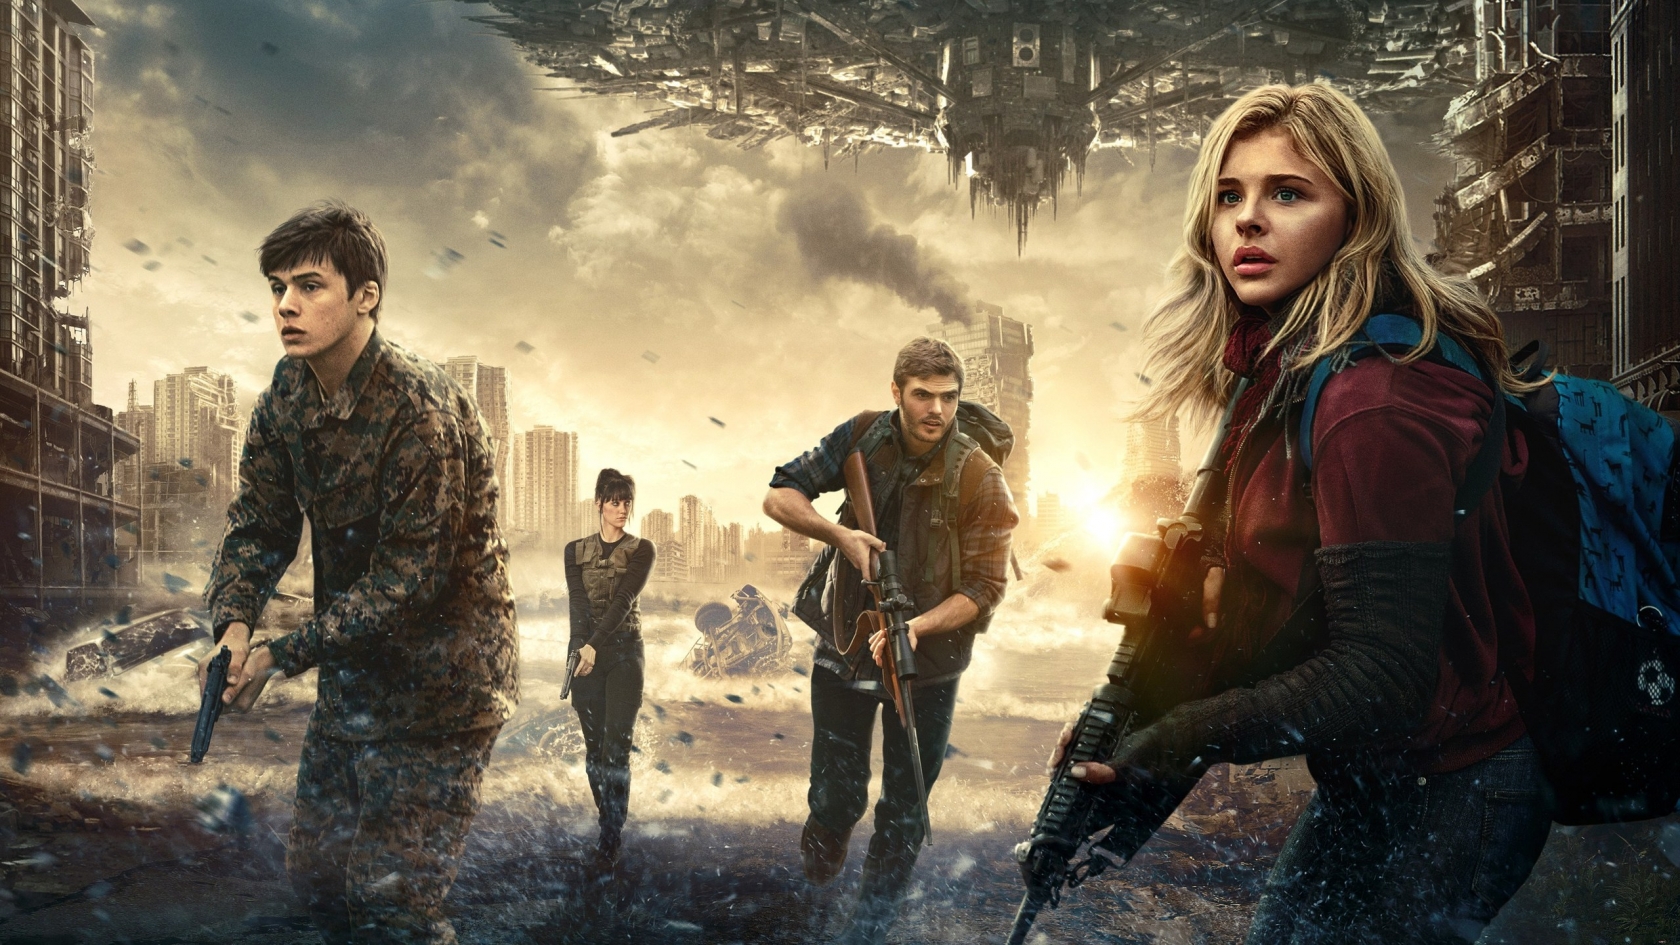 The 5th Wave Film 2016 for 1680 x 945 HDTV resolution